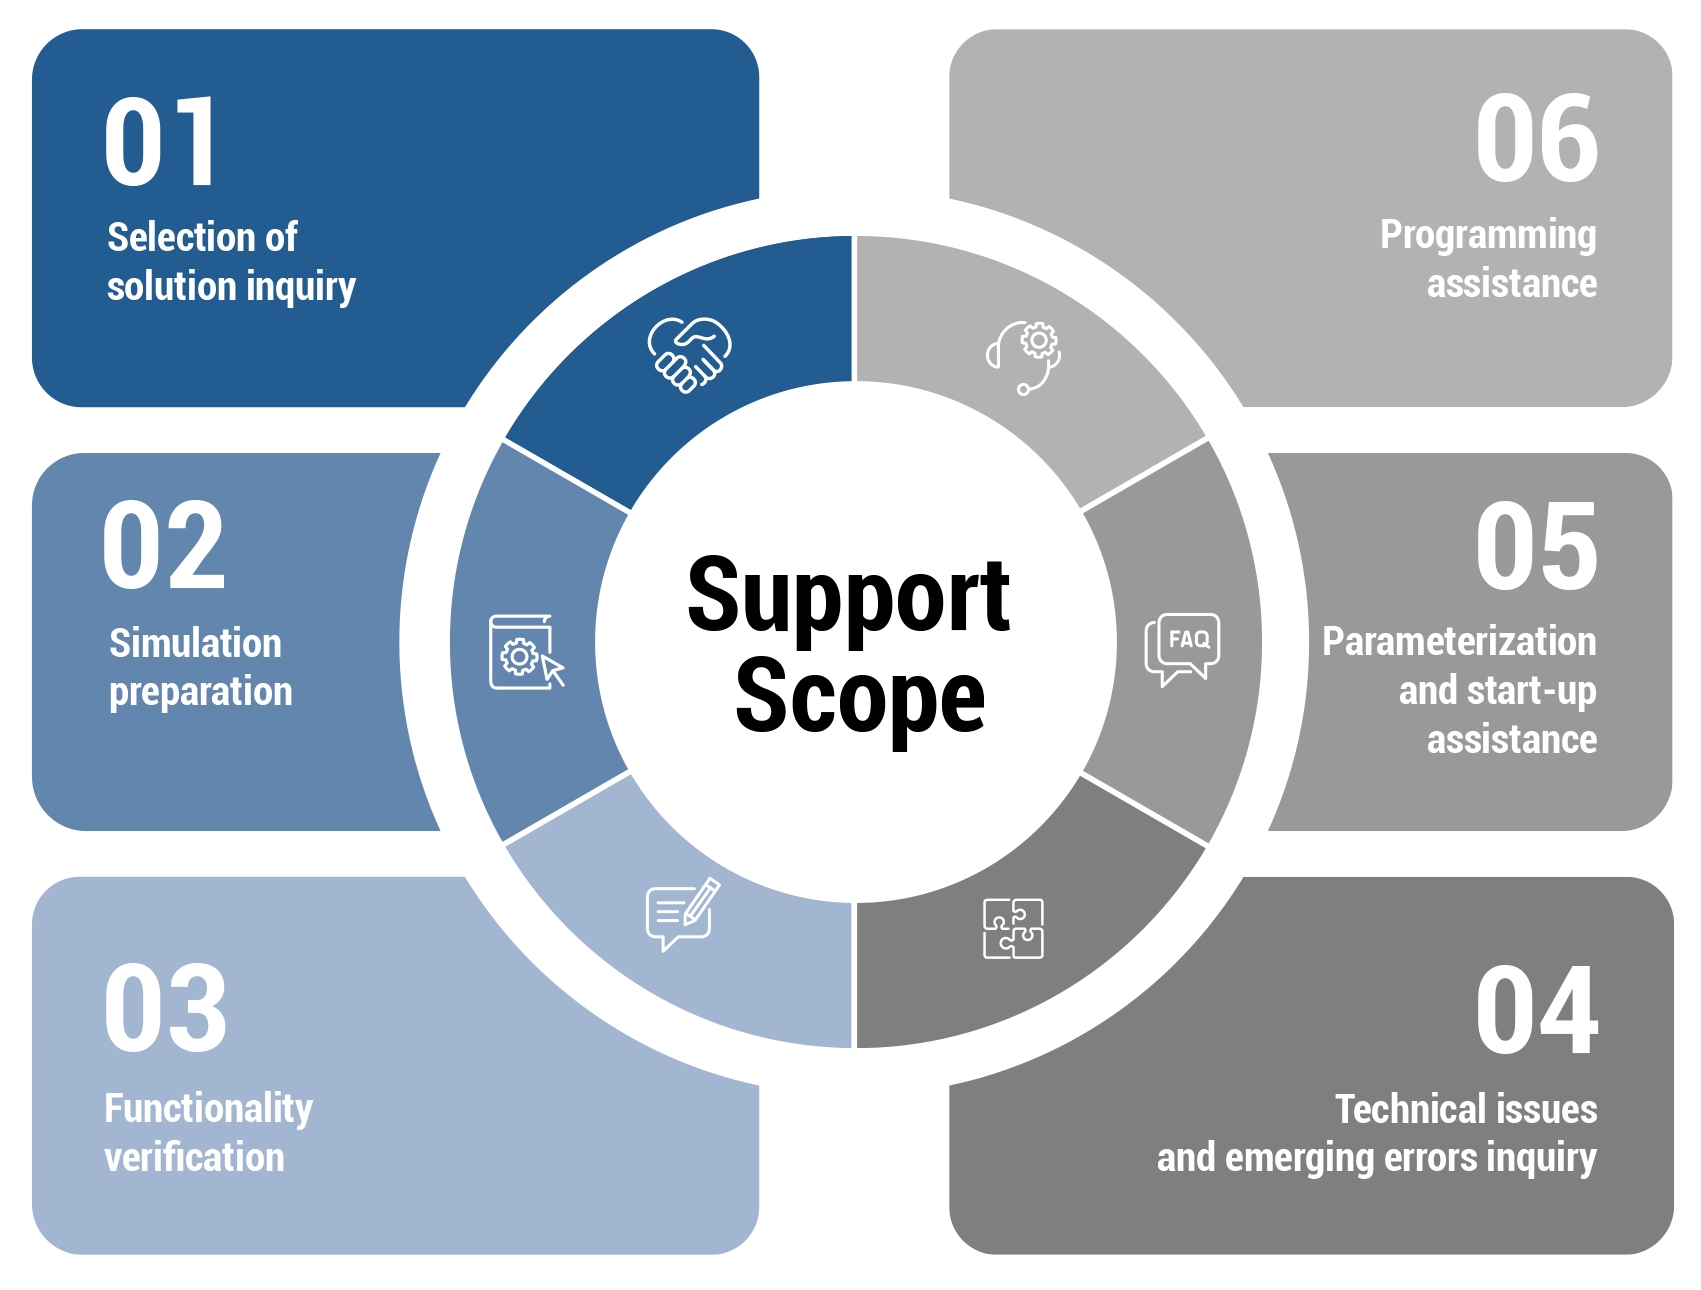 Support scope